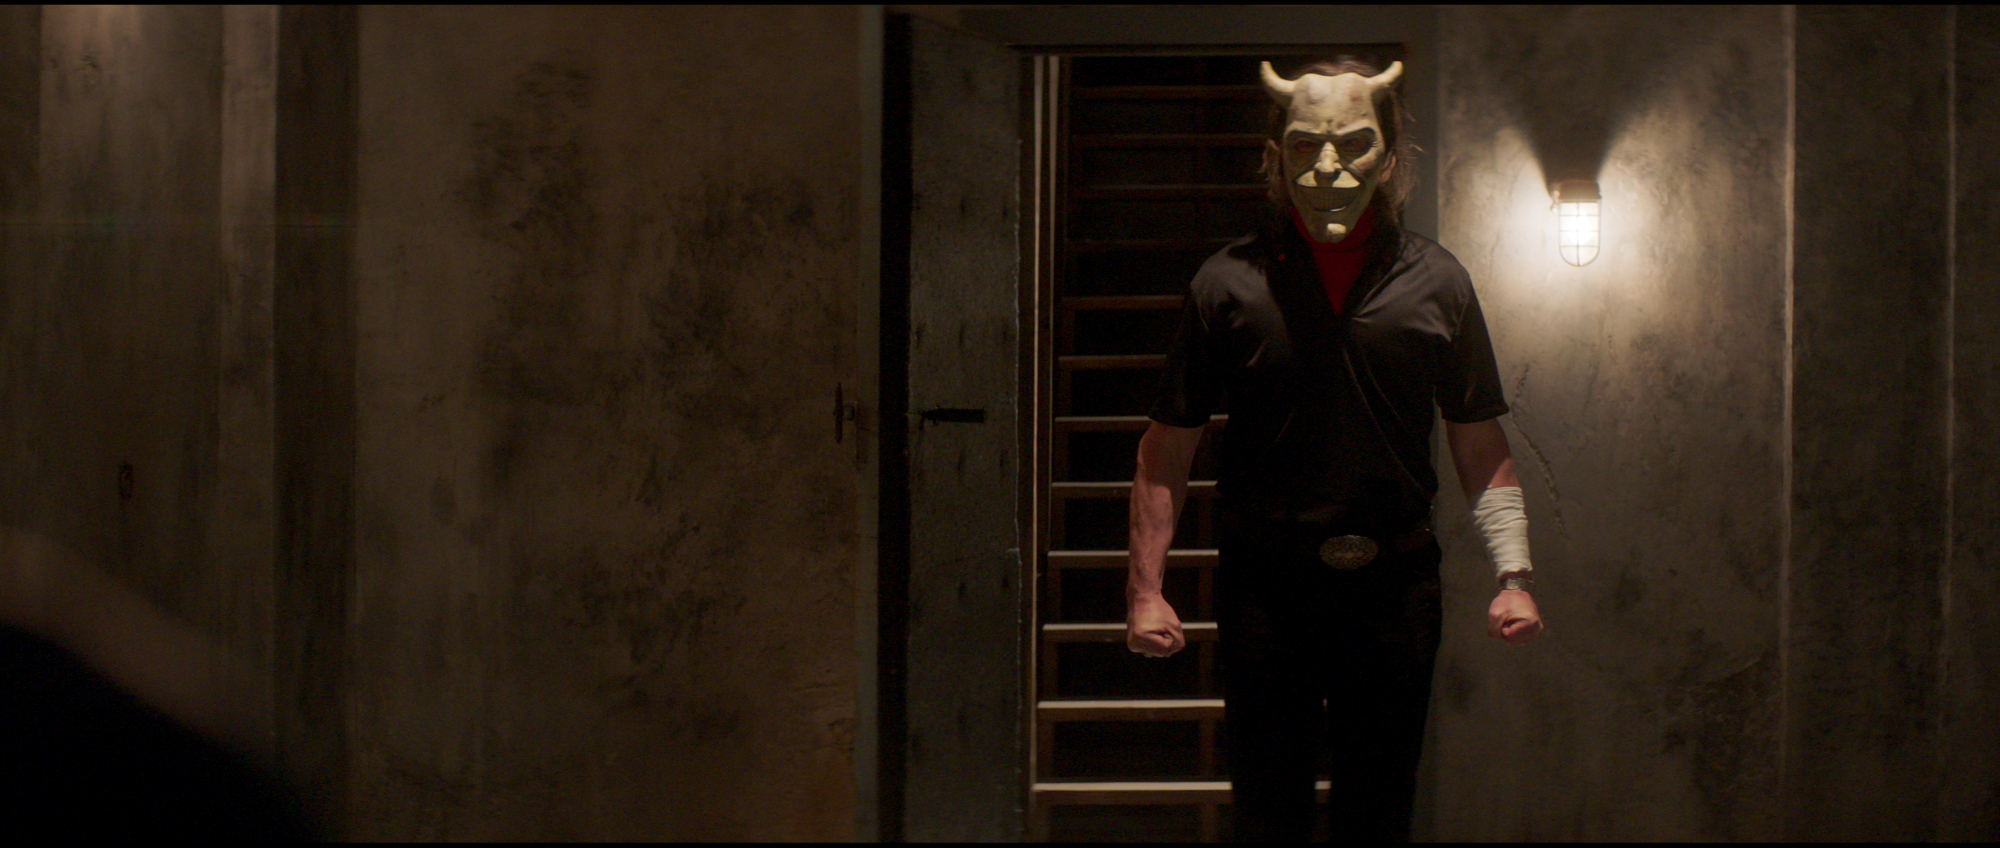 'The Black Phone' Ethan Hawke as The Grabber wearing a smiling demon mask and standing in a stairway